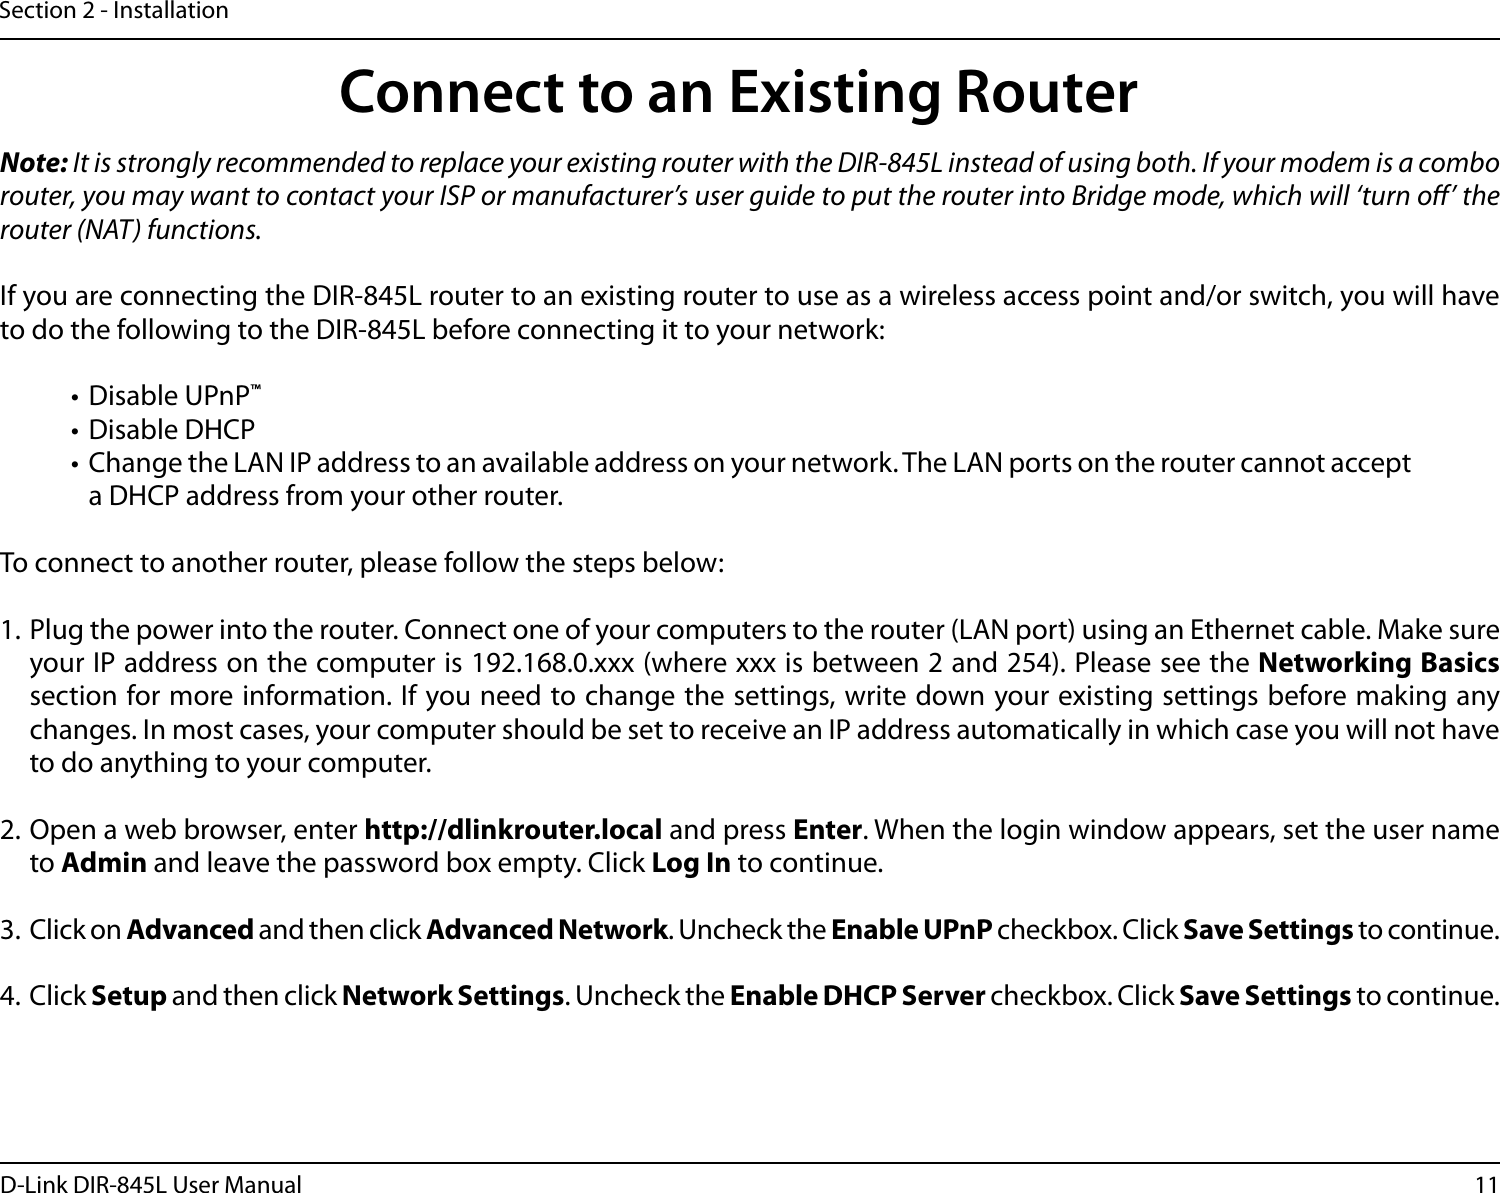 11D-Link DIR-845L User ManualSection 2 - InstallationNote: It is strongly recommended to replace your existing router with the DIR-845L instead of using both. If your modem is a combo router, you may want to contact your ISP or manufacturer’s user guide to put the router into Bridge mode, which will ‘turn o’ the router (NAT) functions. If you are connecting the DIR-845L router to an existing router to use as a wireless access point and/or switch, you will have to do the following to the DIR-845L before connecting it to your network:• Disable UPnP™• Disable DHCP• Change the LAN IP address to an available address on your network. The LAN ports on the router cannot accept a DHCP address from your other router.To connect to another router, please follow the steps below:1. Plug the power into the router. Connect one of your computers to the router (LAN port) using an Ethernet cable. Make sure your IP address on the computer is 192.168.0.xxx (where xxx is between 2 and 254). Please see the Networking Basics section for more information. If you need to change the settings, write down your existing settings before making any changes. In most cases, your computer should be set to receive an IP address automatically in which case you will not have to do anything to your computer.2. Open a web browser, enter http://dlinkrouter.local and press Enter. When the login window appears, set the user name to Admin and leave the password box empty. Click Log In to continue.3. Click on Advanced and then click Advanced Network. Uncheck the Enable UPnP checkbox. Click Save Settings to continue. 4. Click Setup and then click Network Settings. Uncheck the Enable DHCP Server checkbox. Click Save Settings to continue.Connect to an Existing Router